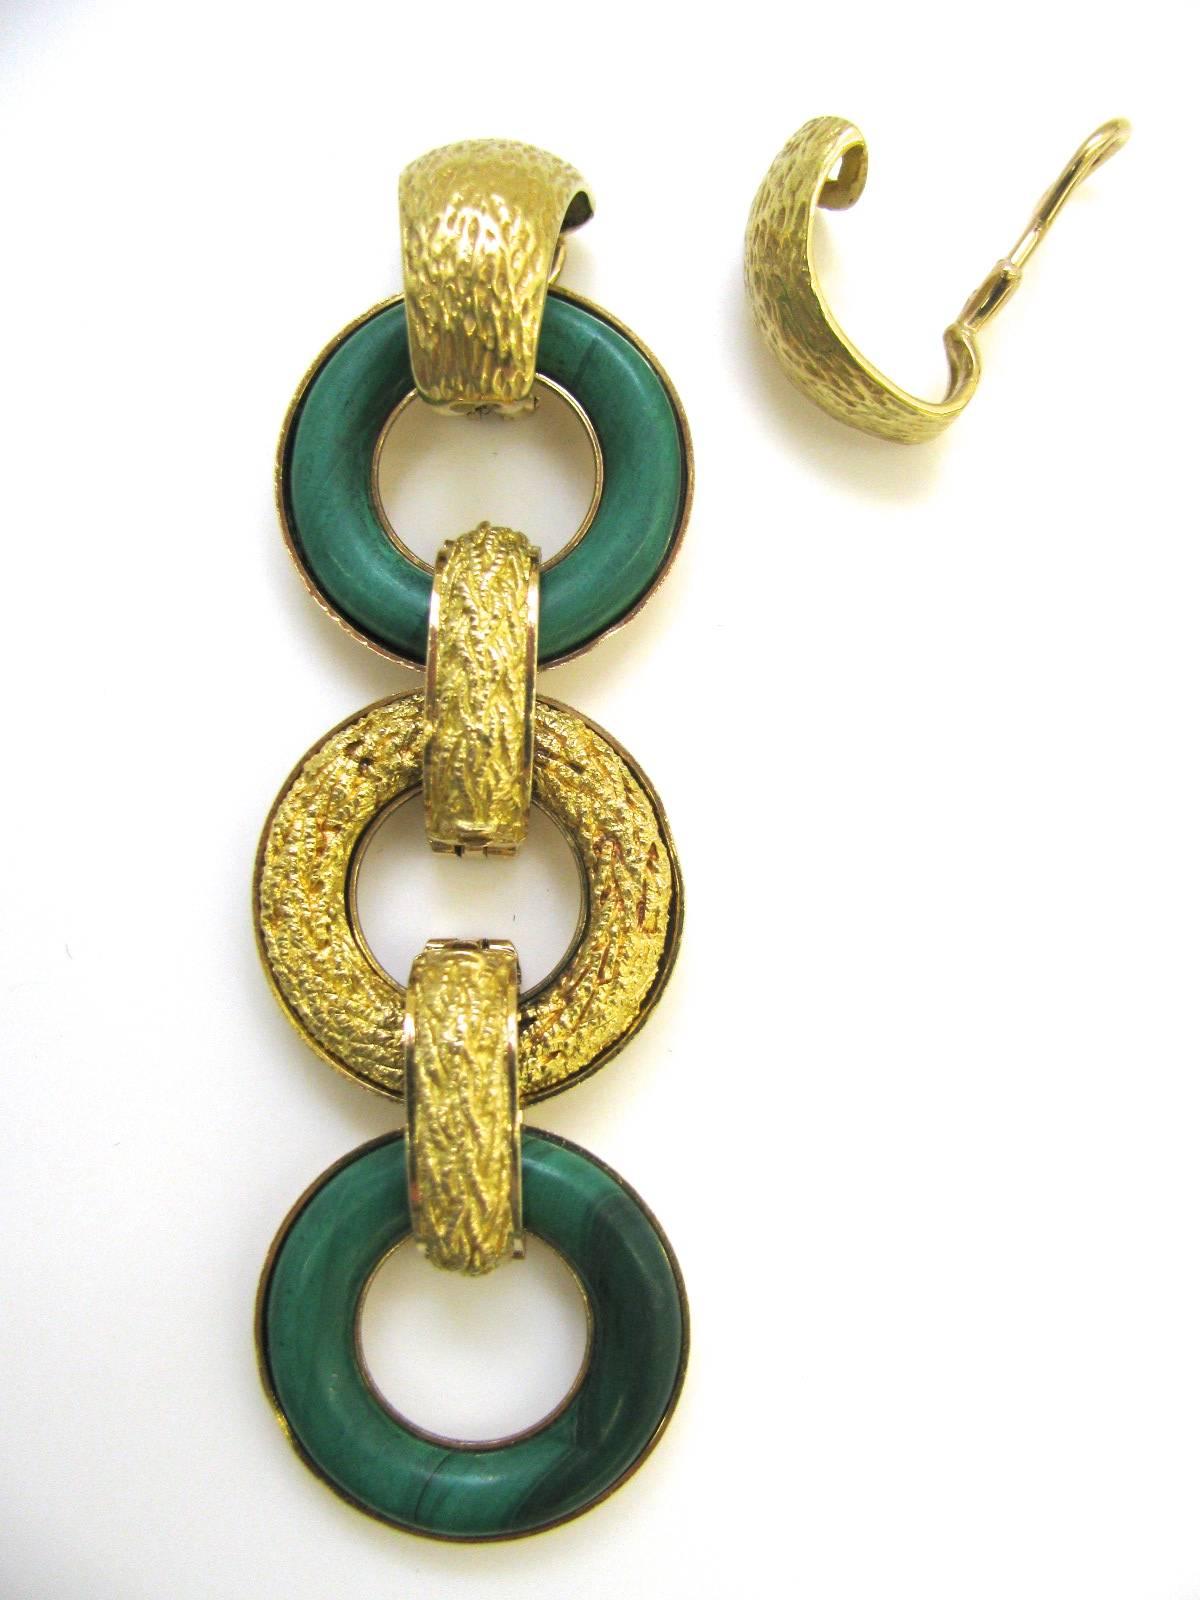 Ulmer et Cie Malachite and Gold Link Modular Jewel 1960's French 2